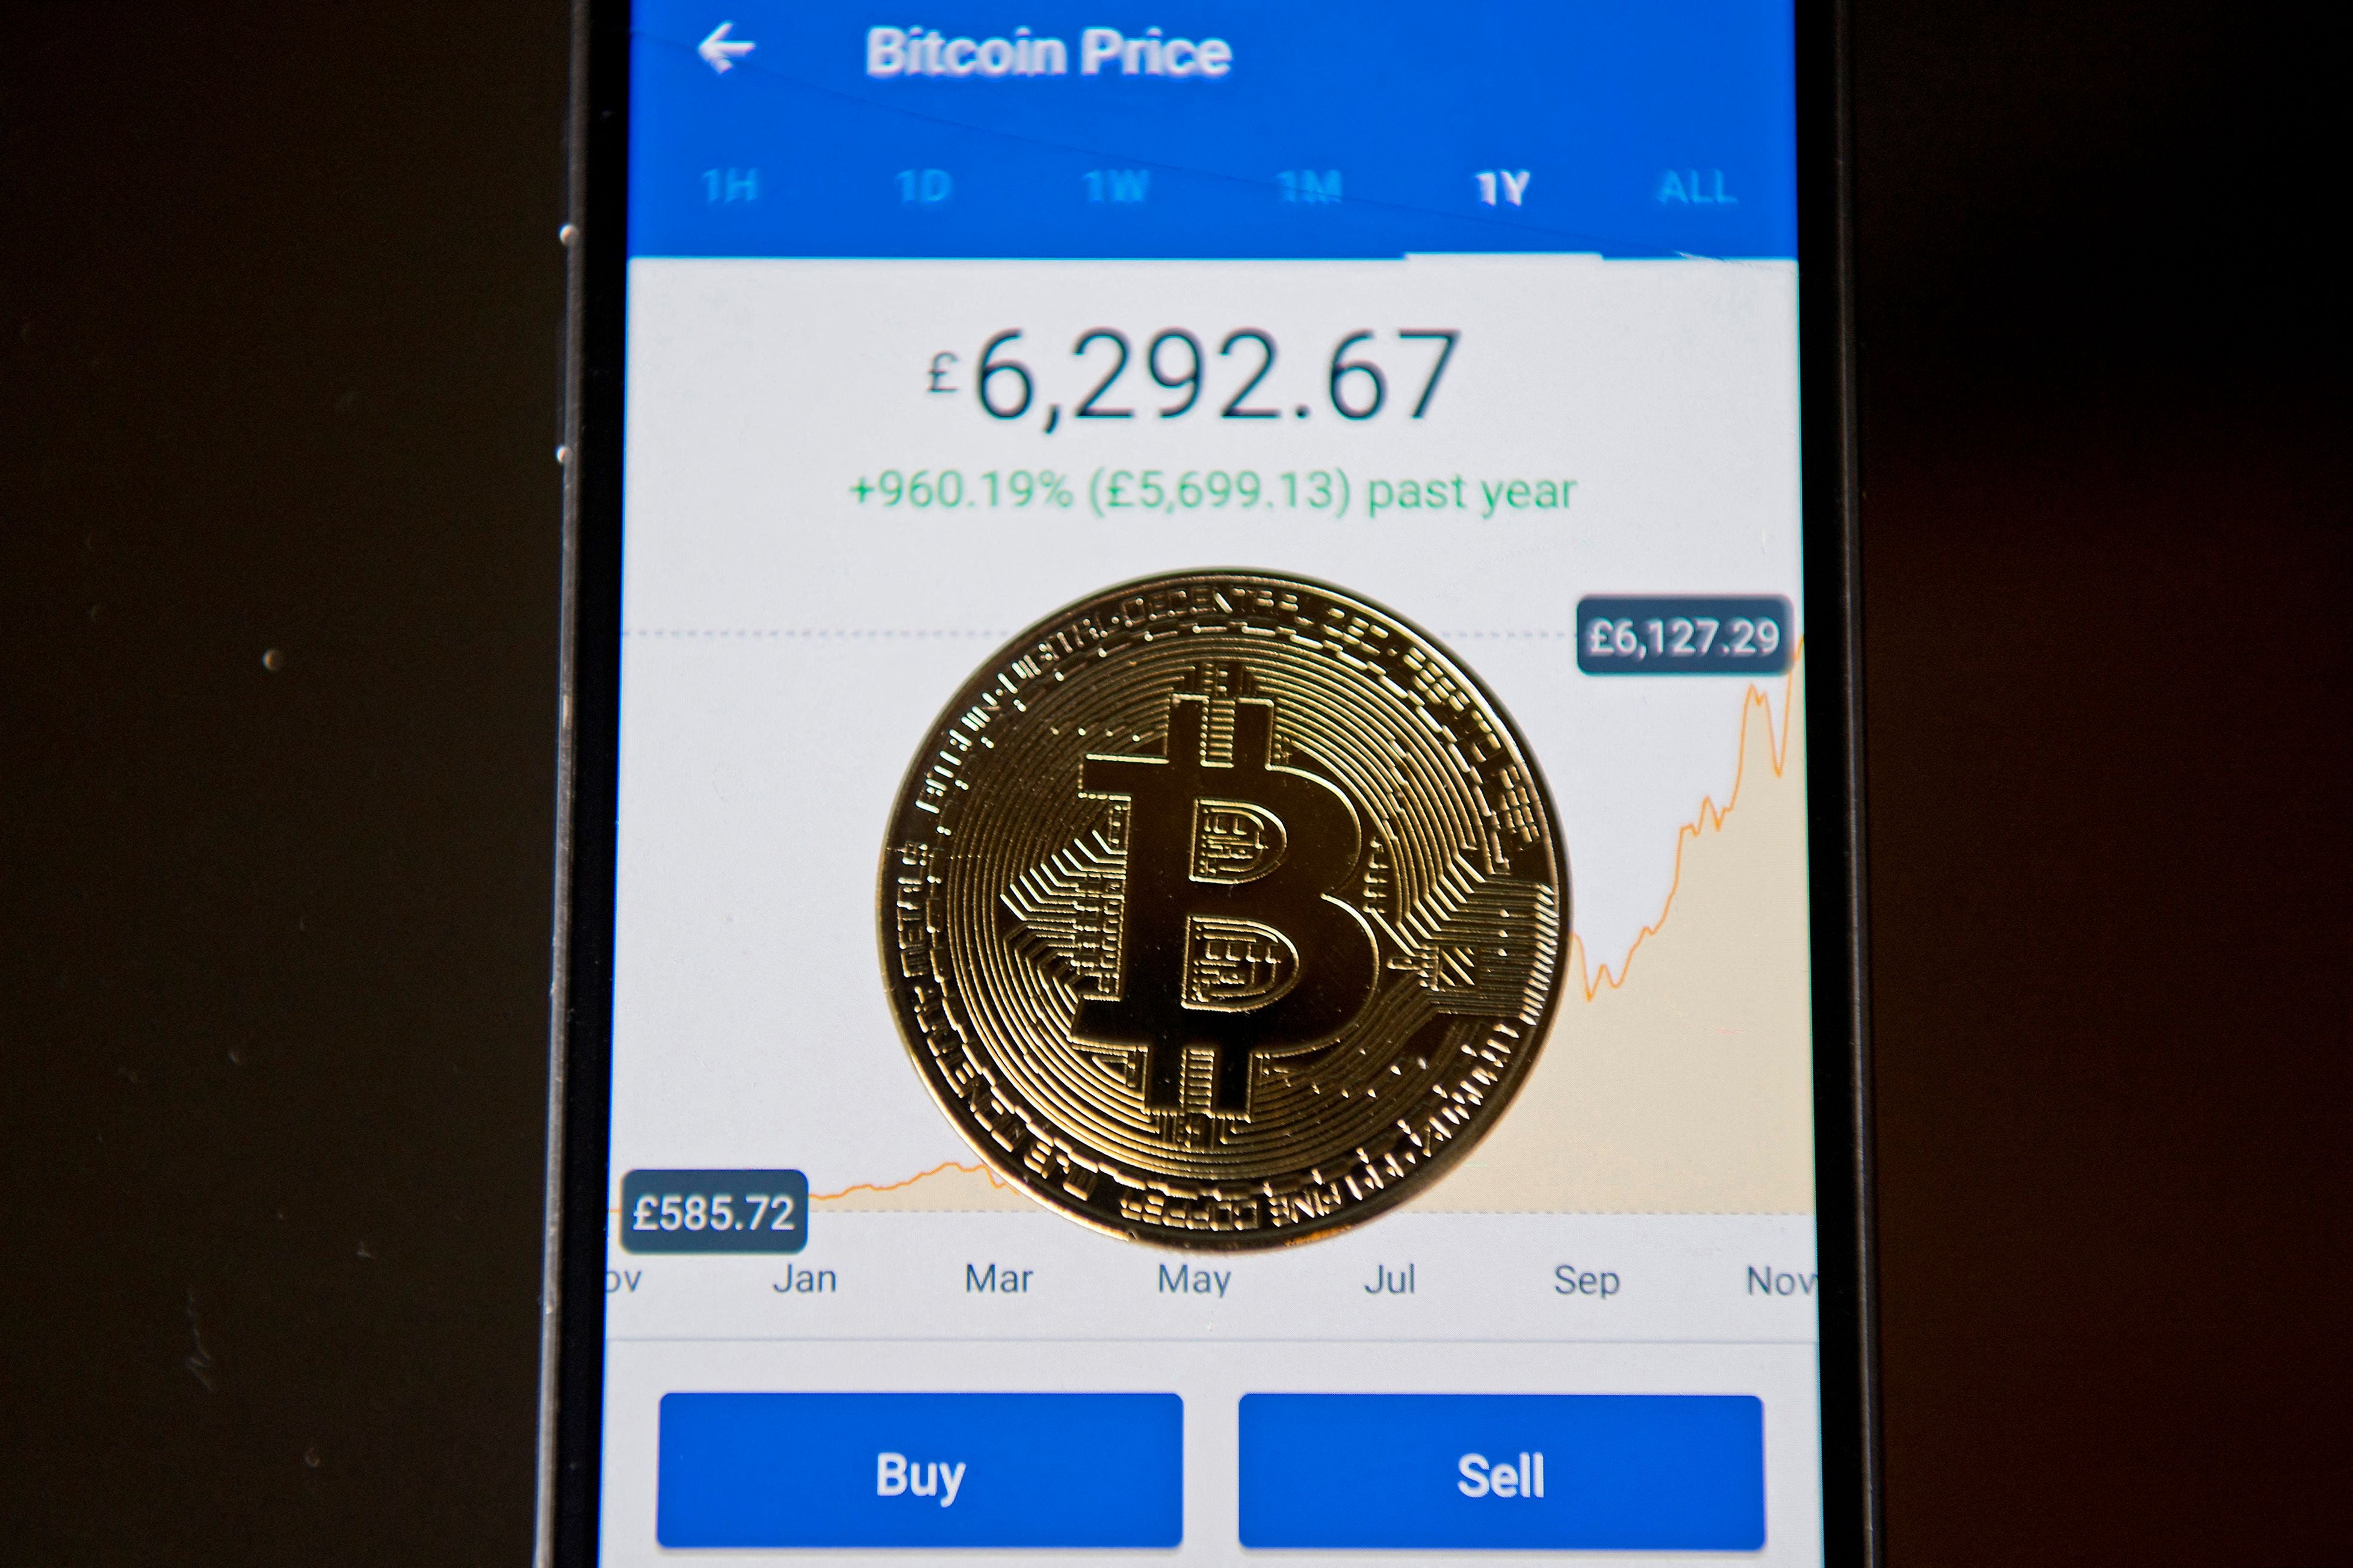 A gold plated souvenir Bitcoin coin is arranged for a photograph on a smart phone displaying current value of a single bitcoin, and options to buy or sell, on an app for the digital asset broker, Coinbase, in London on November 20, 2017. (Photo by JUSTIN TALLIS/AFP via Getty Images)